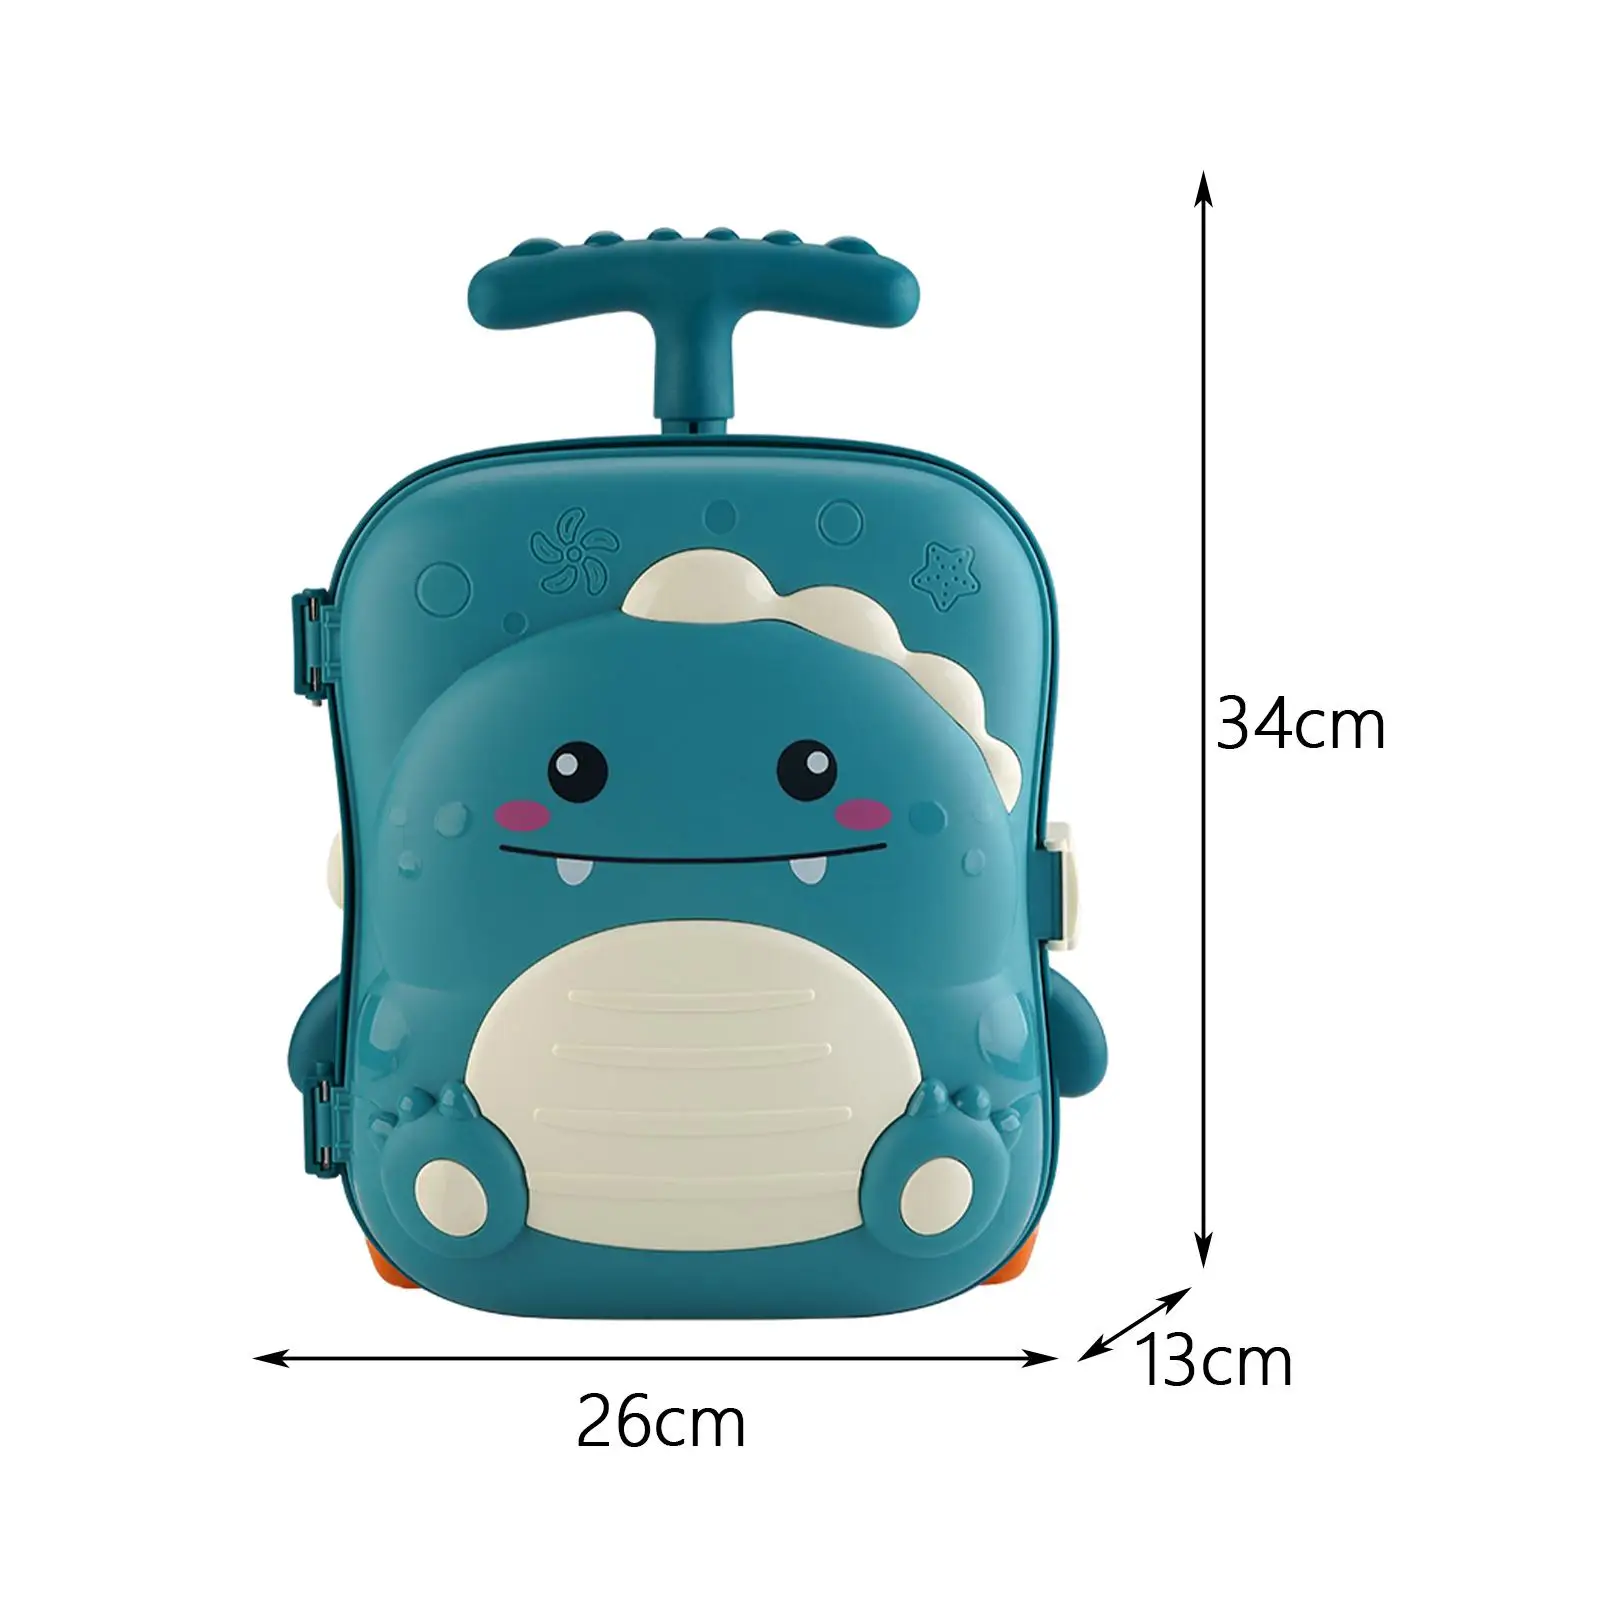 Sand Toy Sand Playing Toy Mini Dinosaur Trolley Case Kids Beach Sand Toys Set for Seaside Bathtub Outdoor Activities Beach Pools